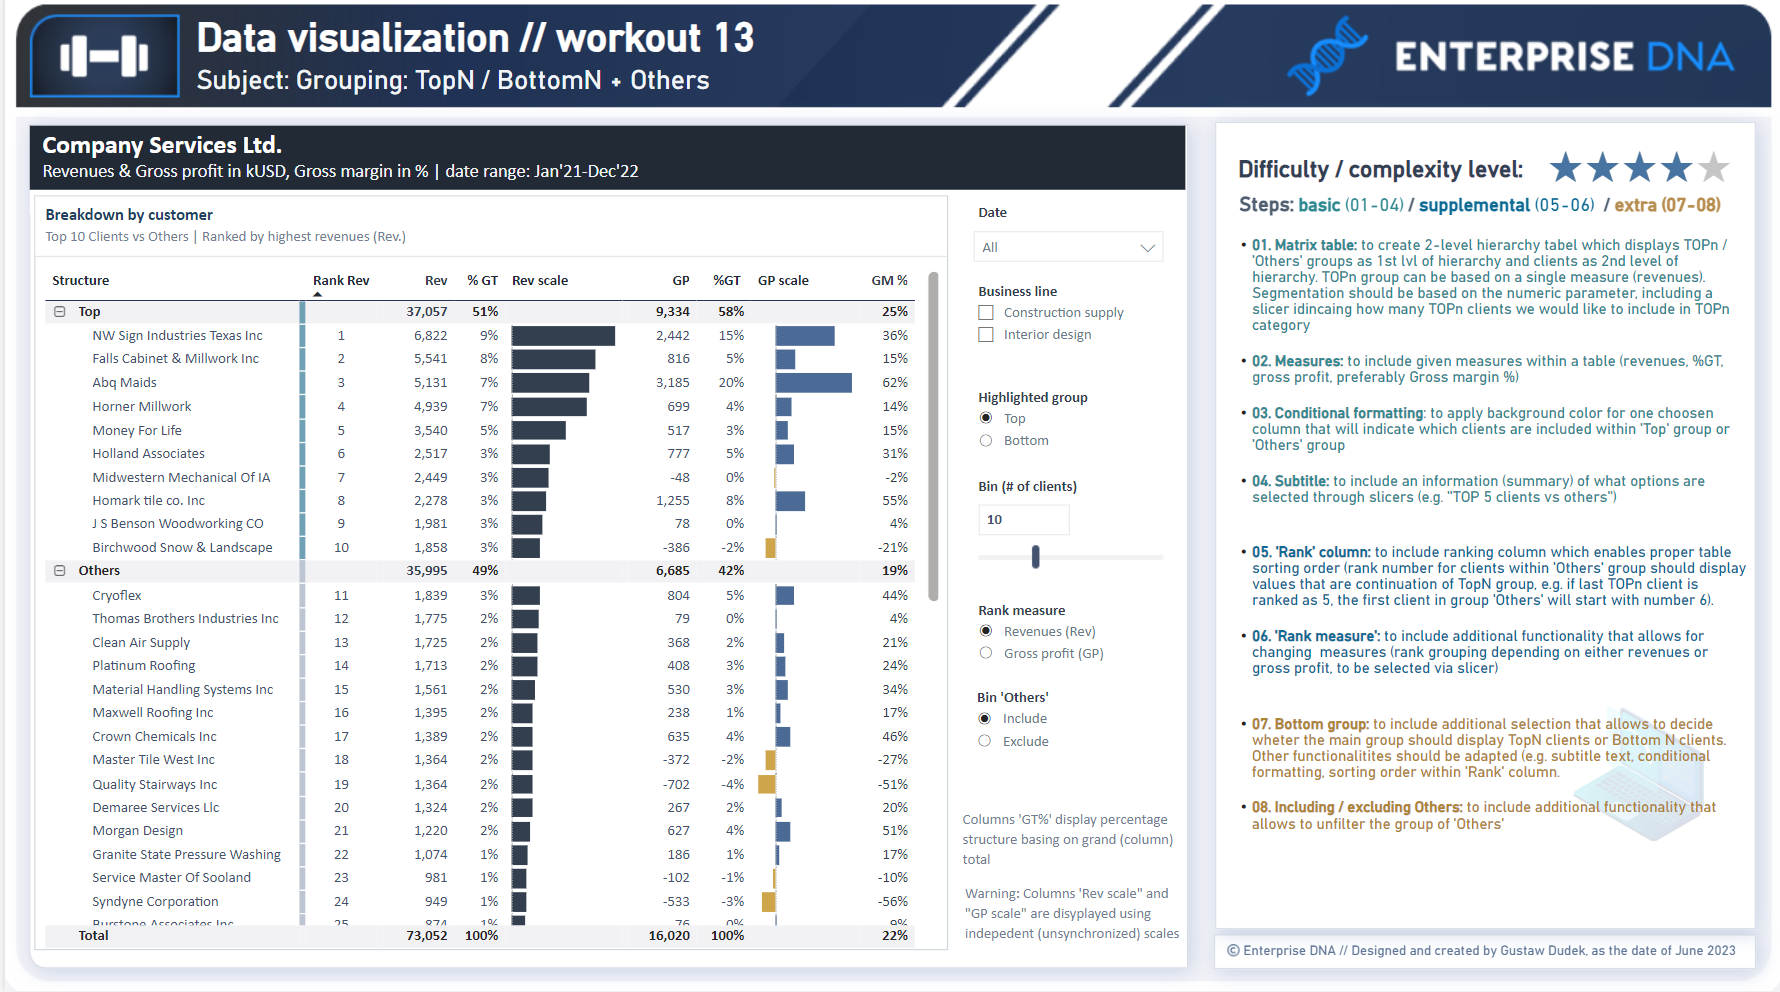 III. How Visualization Enhances Performance in Workouts